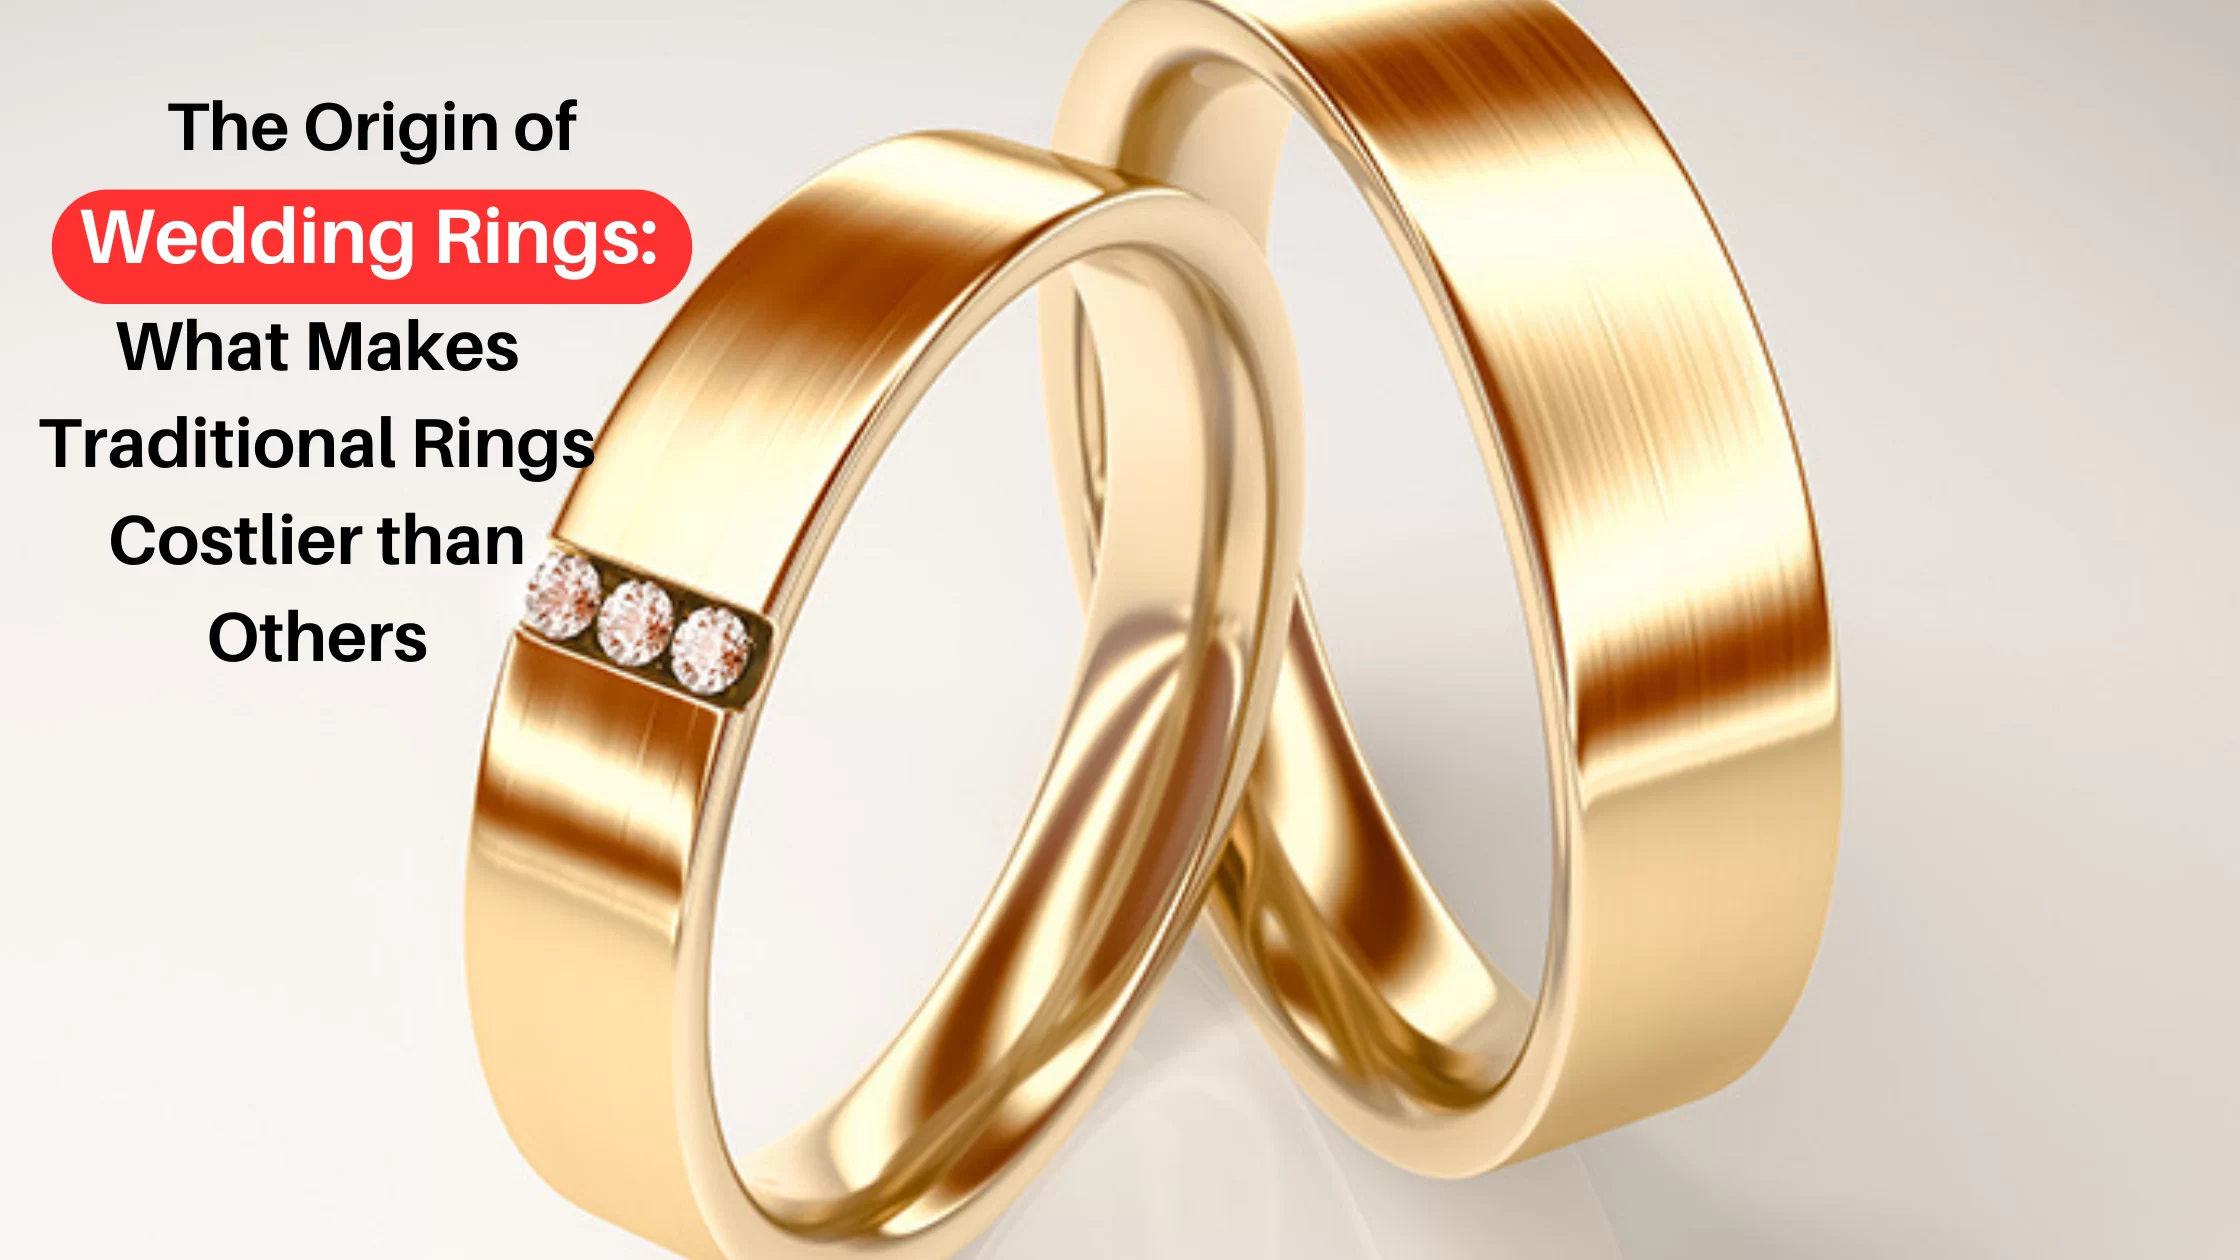 The Origin of Wedding Rings: What Makes Traditional Rings Costlier than Others